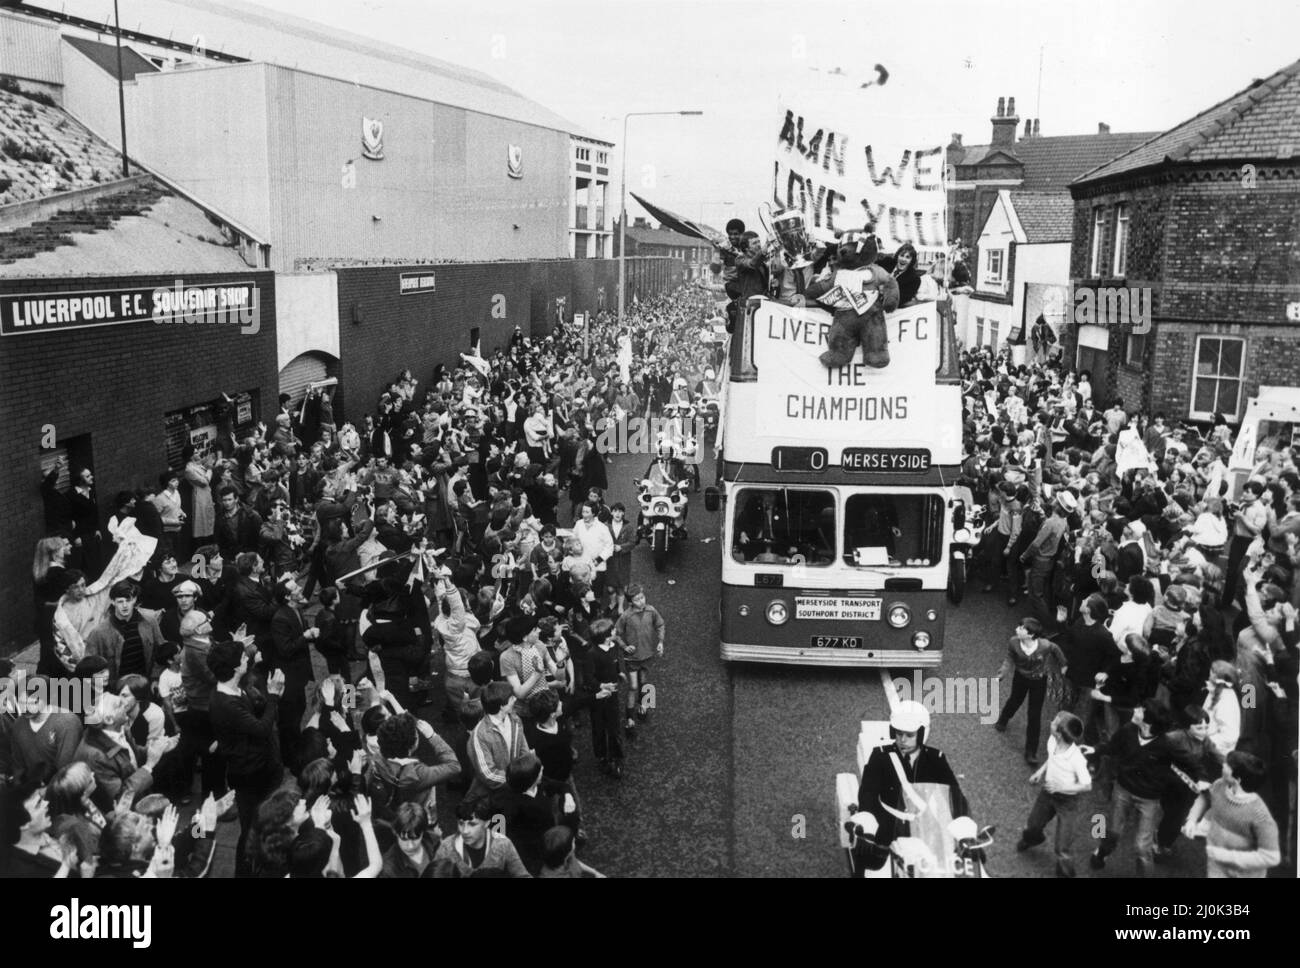 The Liverpool FC Tour Bus passes Anfield Football Club in Walton, Liverpool as the players enjoy a parade in their honour after winning the 1981 European Cup Final against Real Madrid (1-0).  Picture taken May 1981. Stock Photo